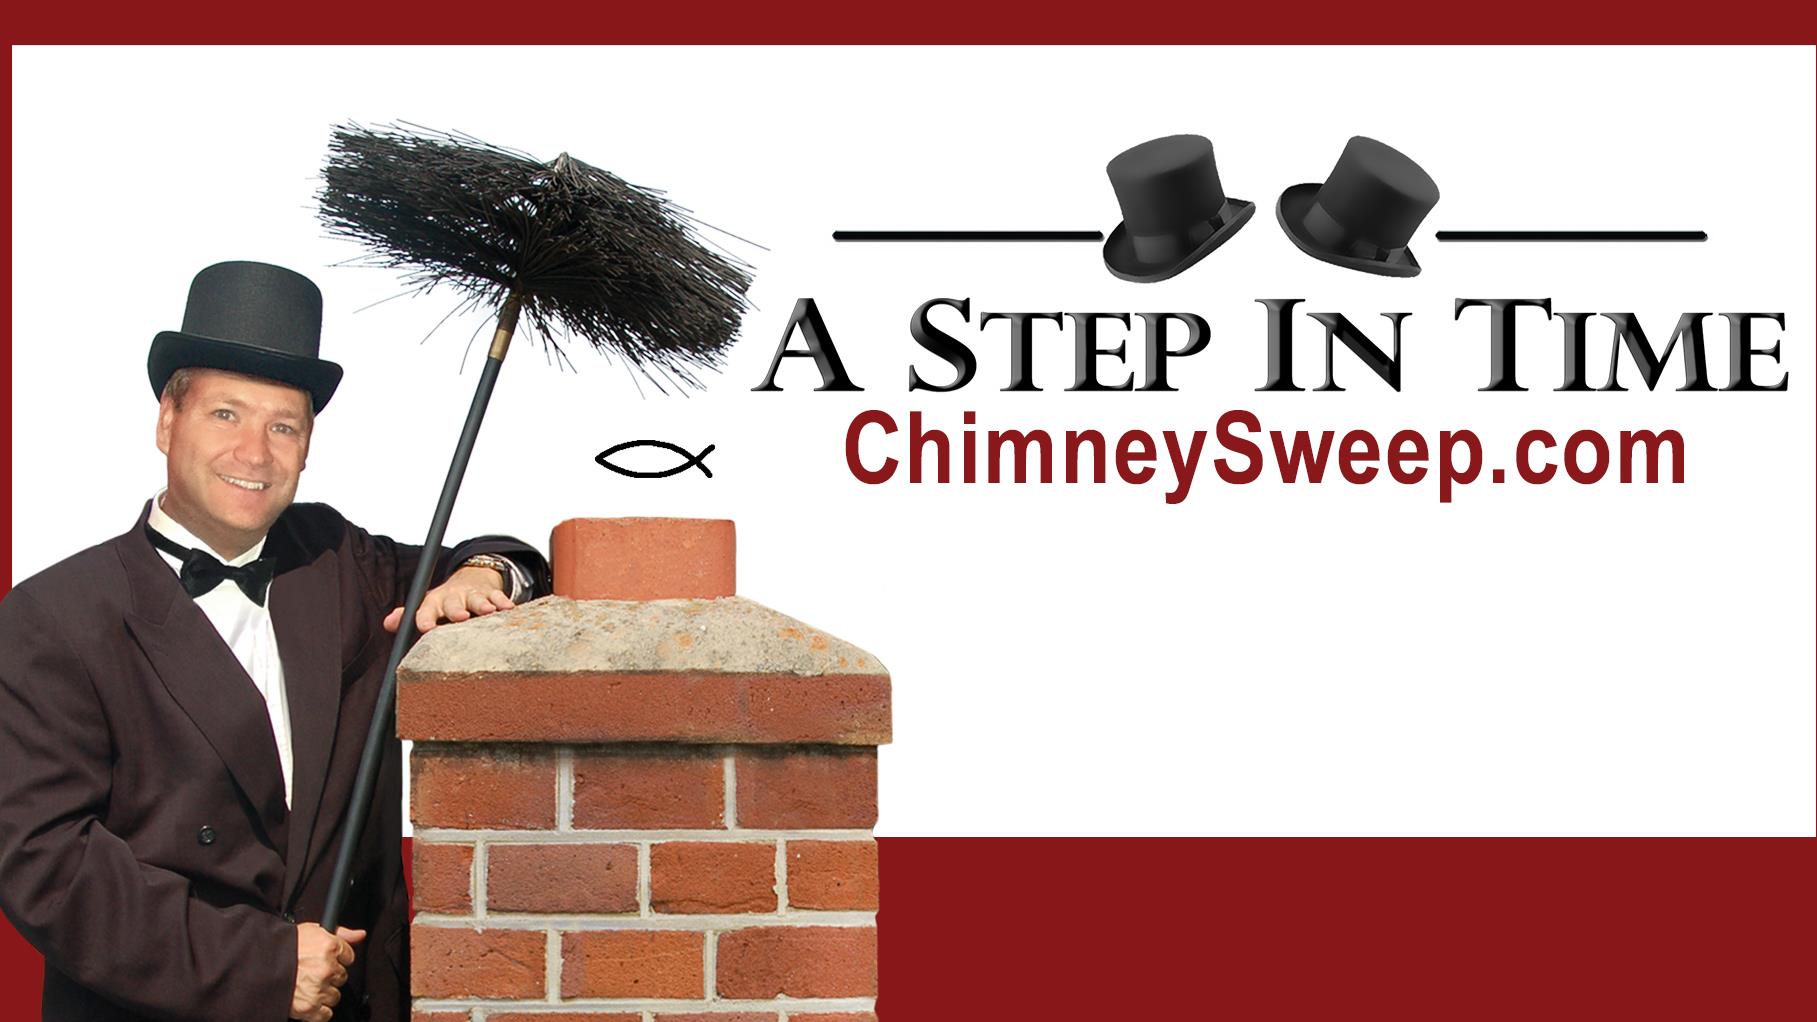 A Step In Time Maryland, LLC/Chimney Sweeps                                                                                                                                                                                          